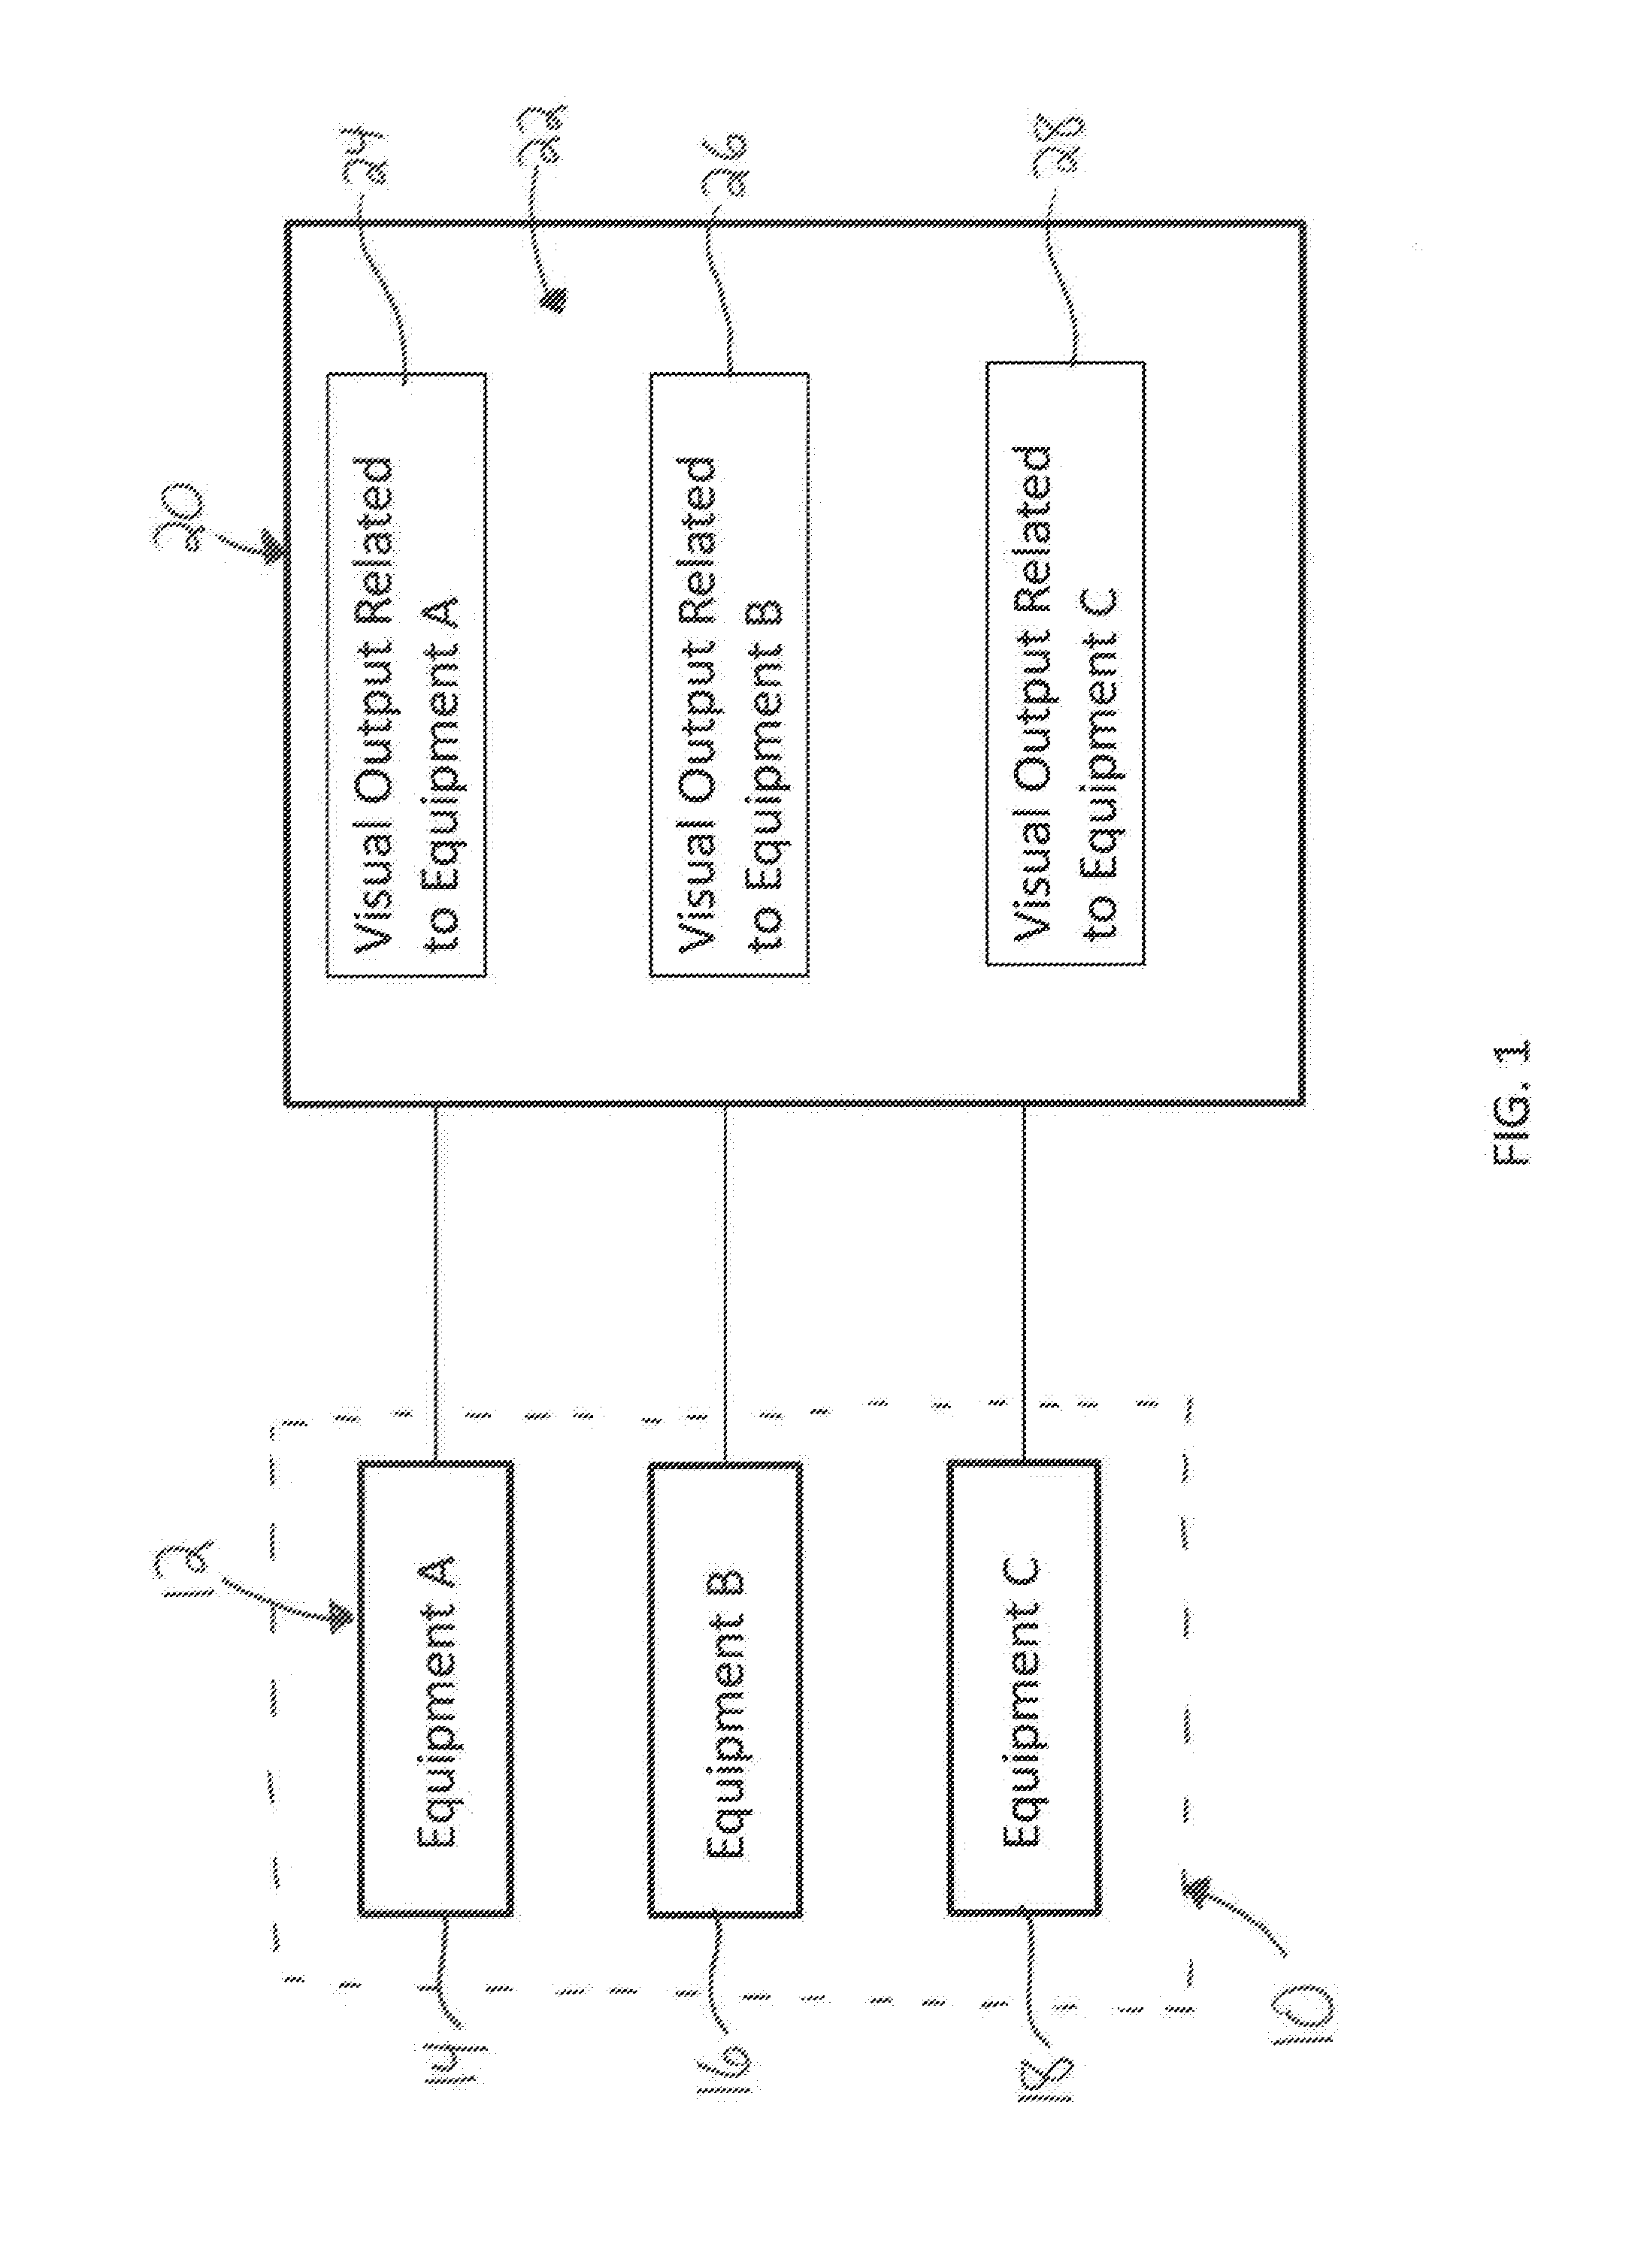 Method of determining availability and reliability of facility equipment